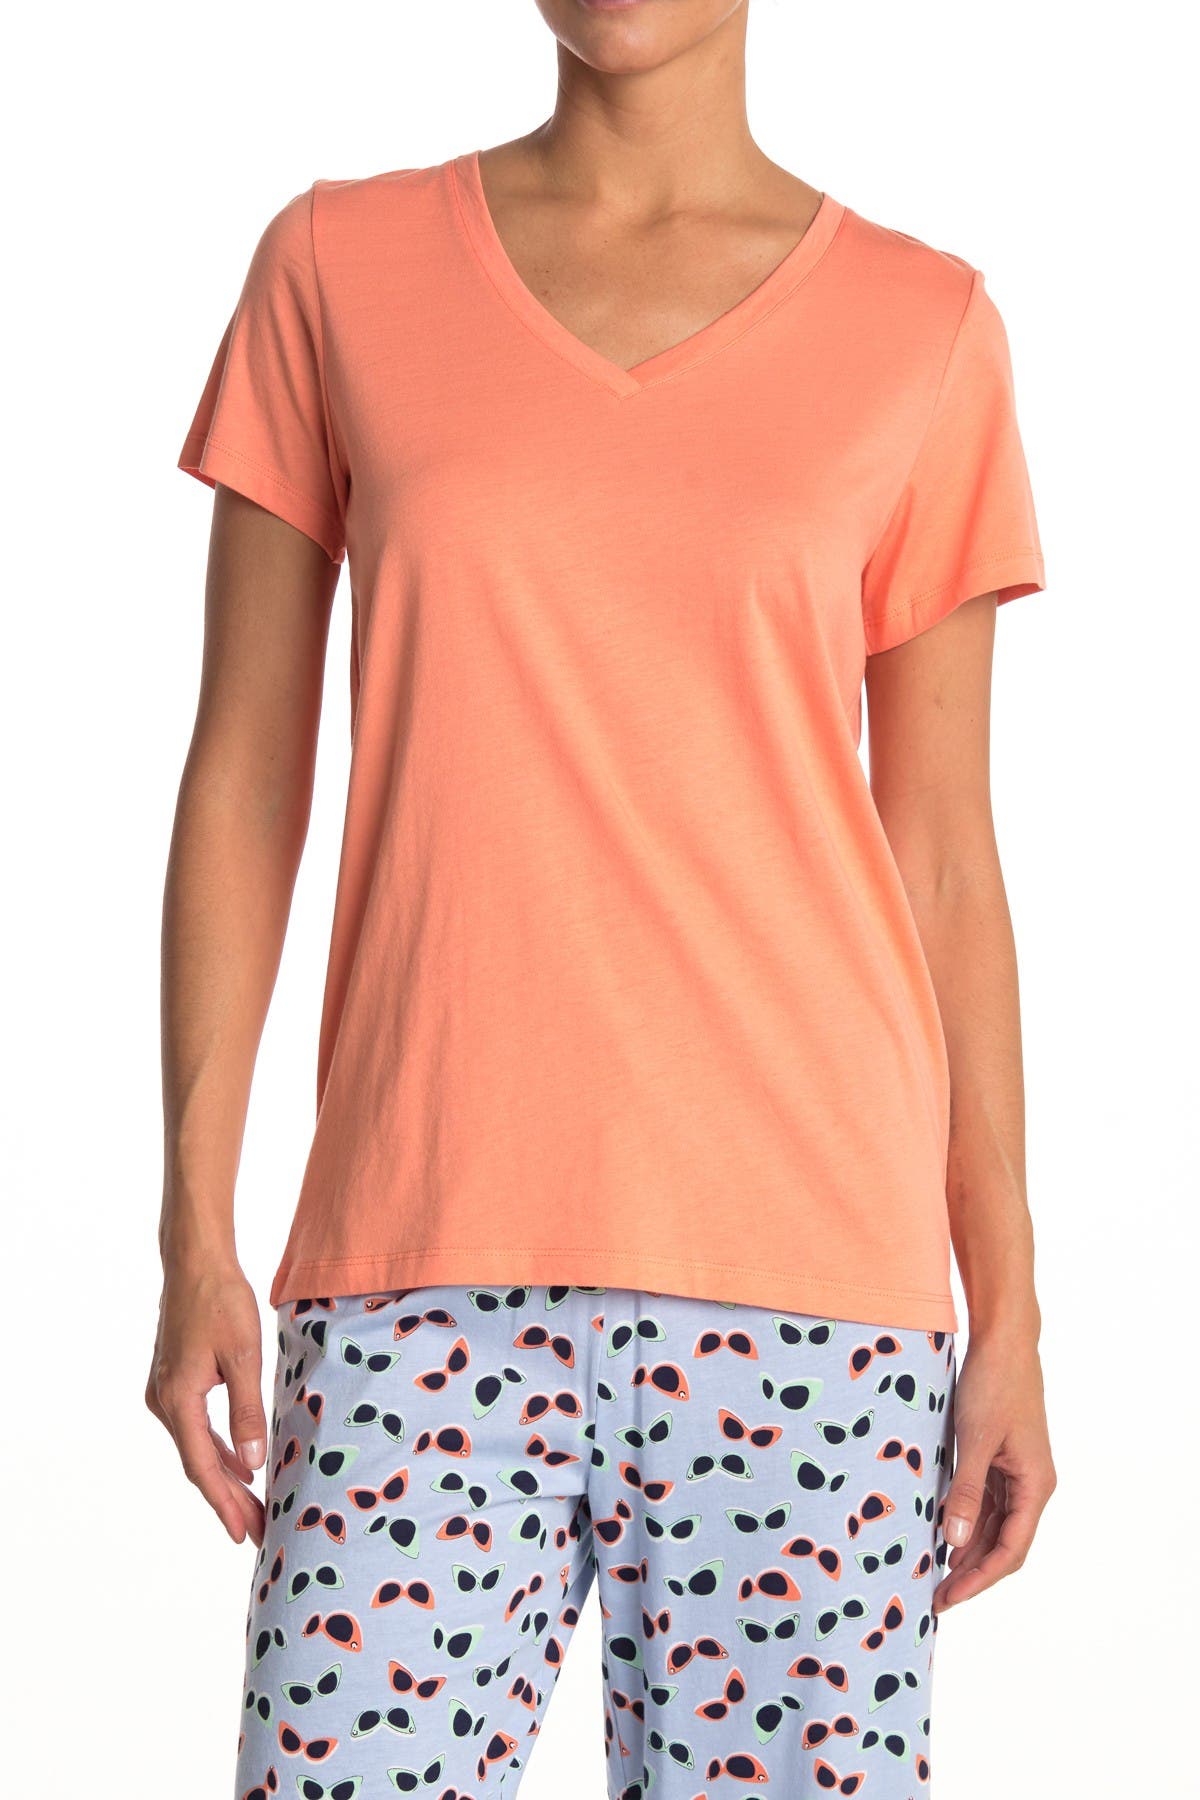 Hue Solid Short Sleeve V-neck T-shirt In Peach Pink